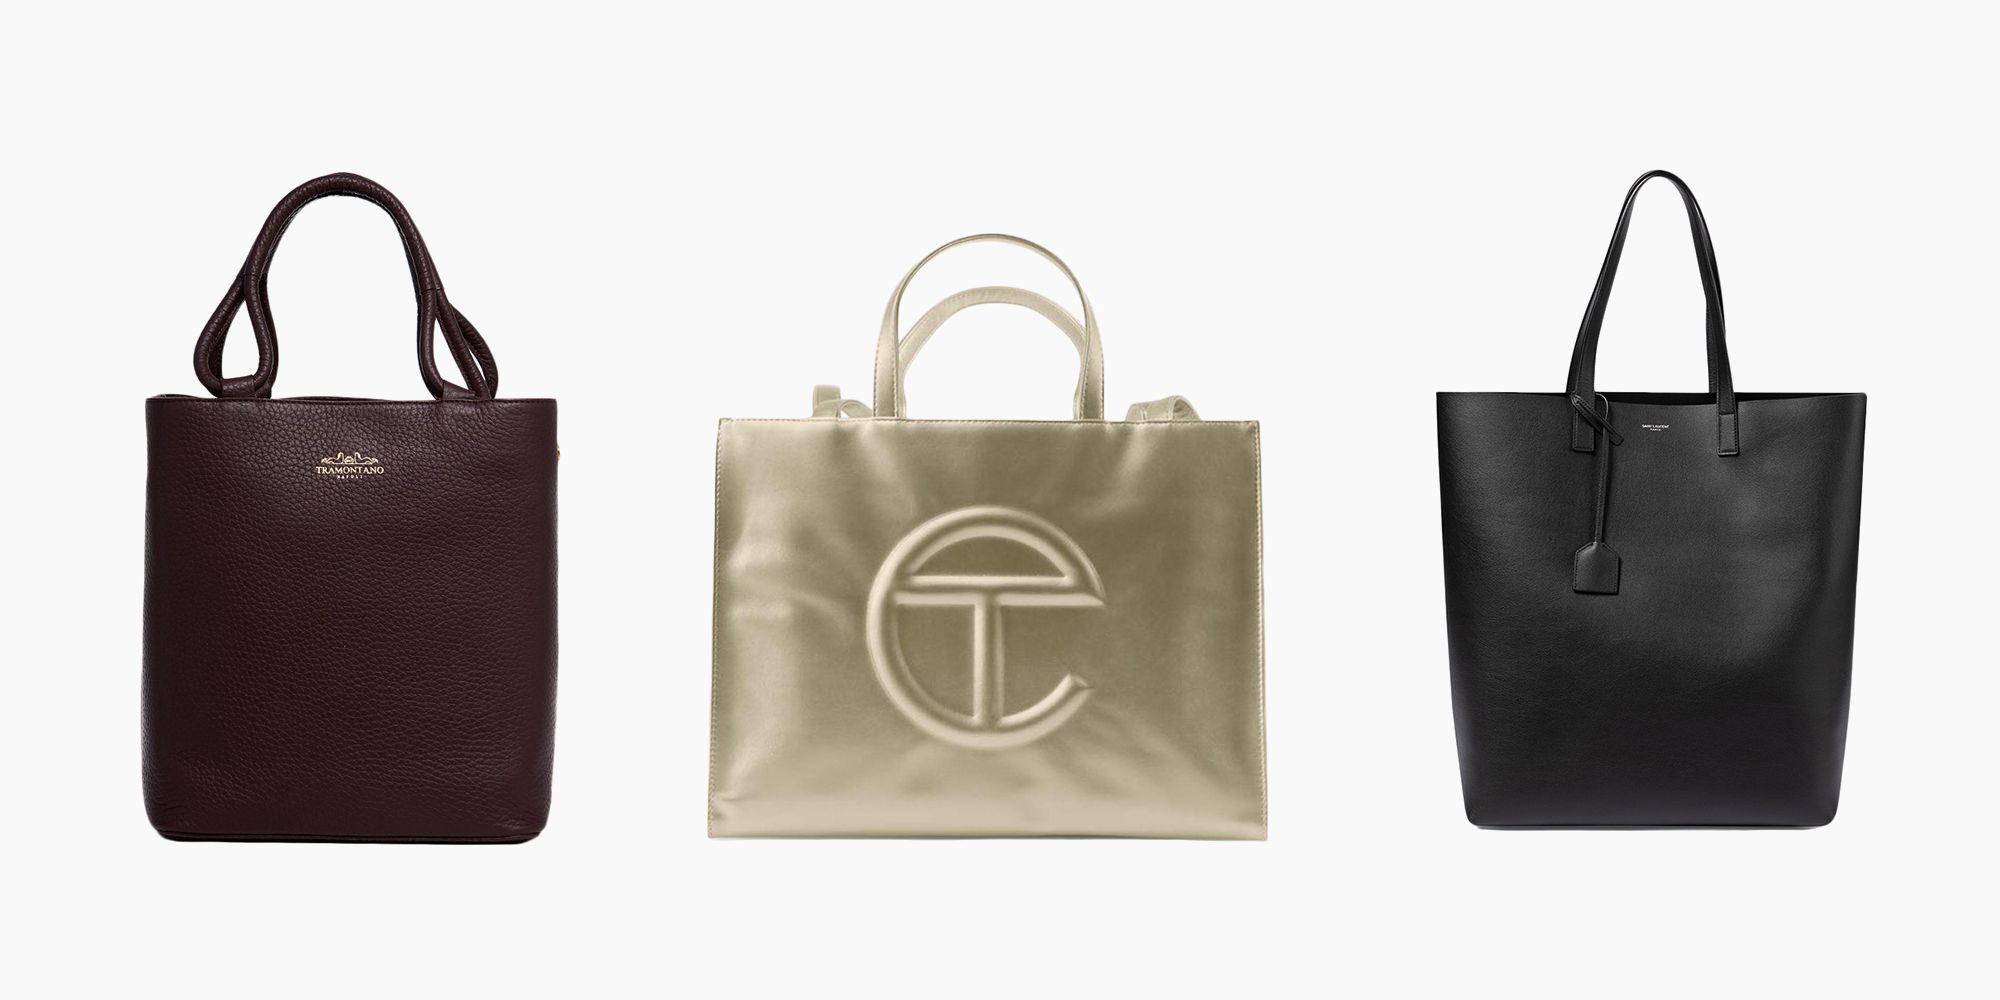 5 Tote bags that will fit your laptop perfectly